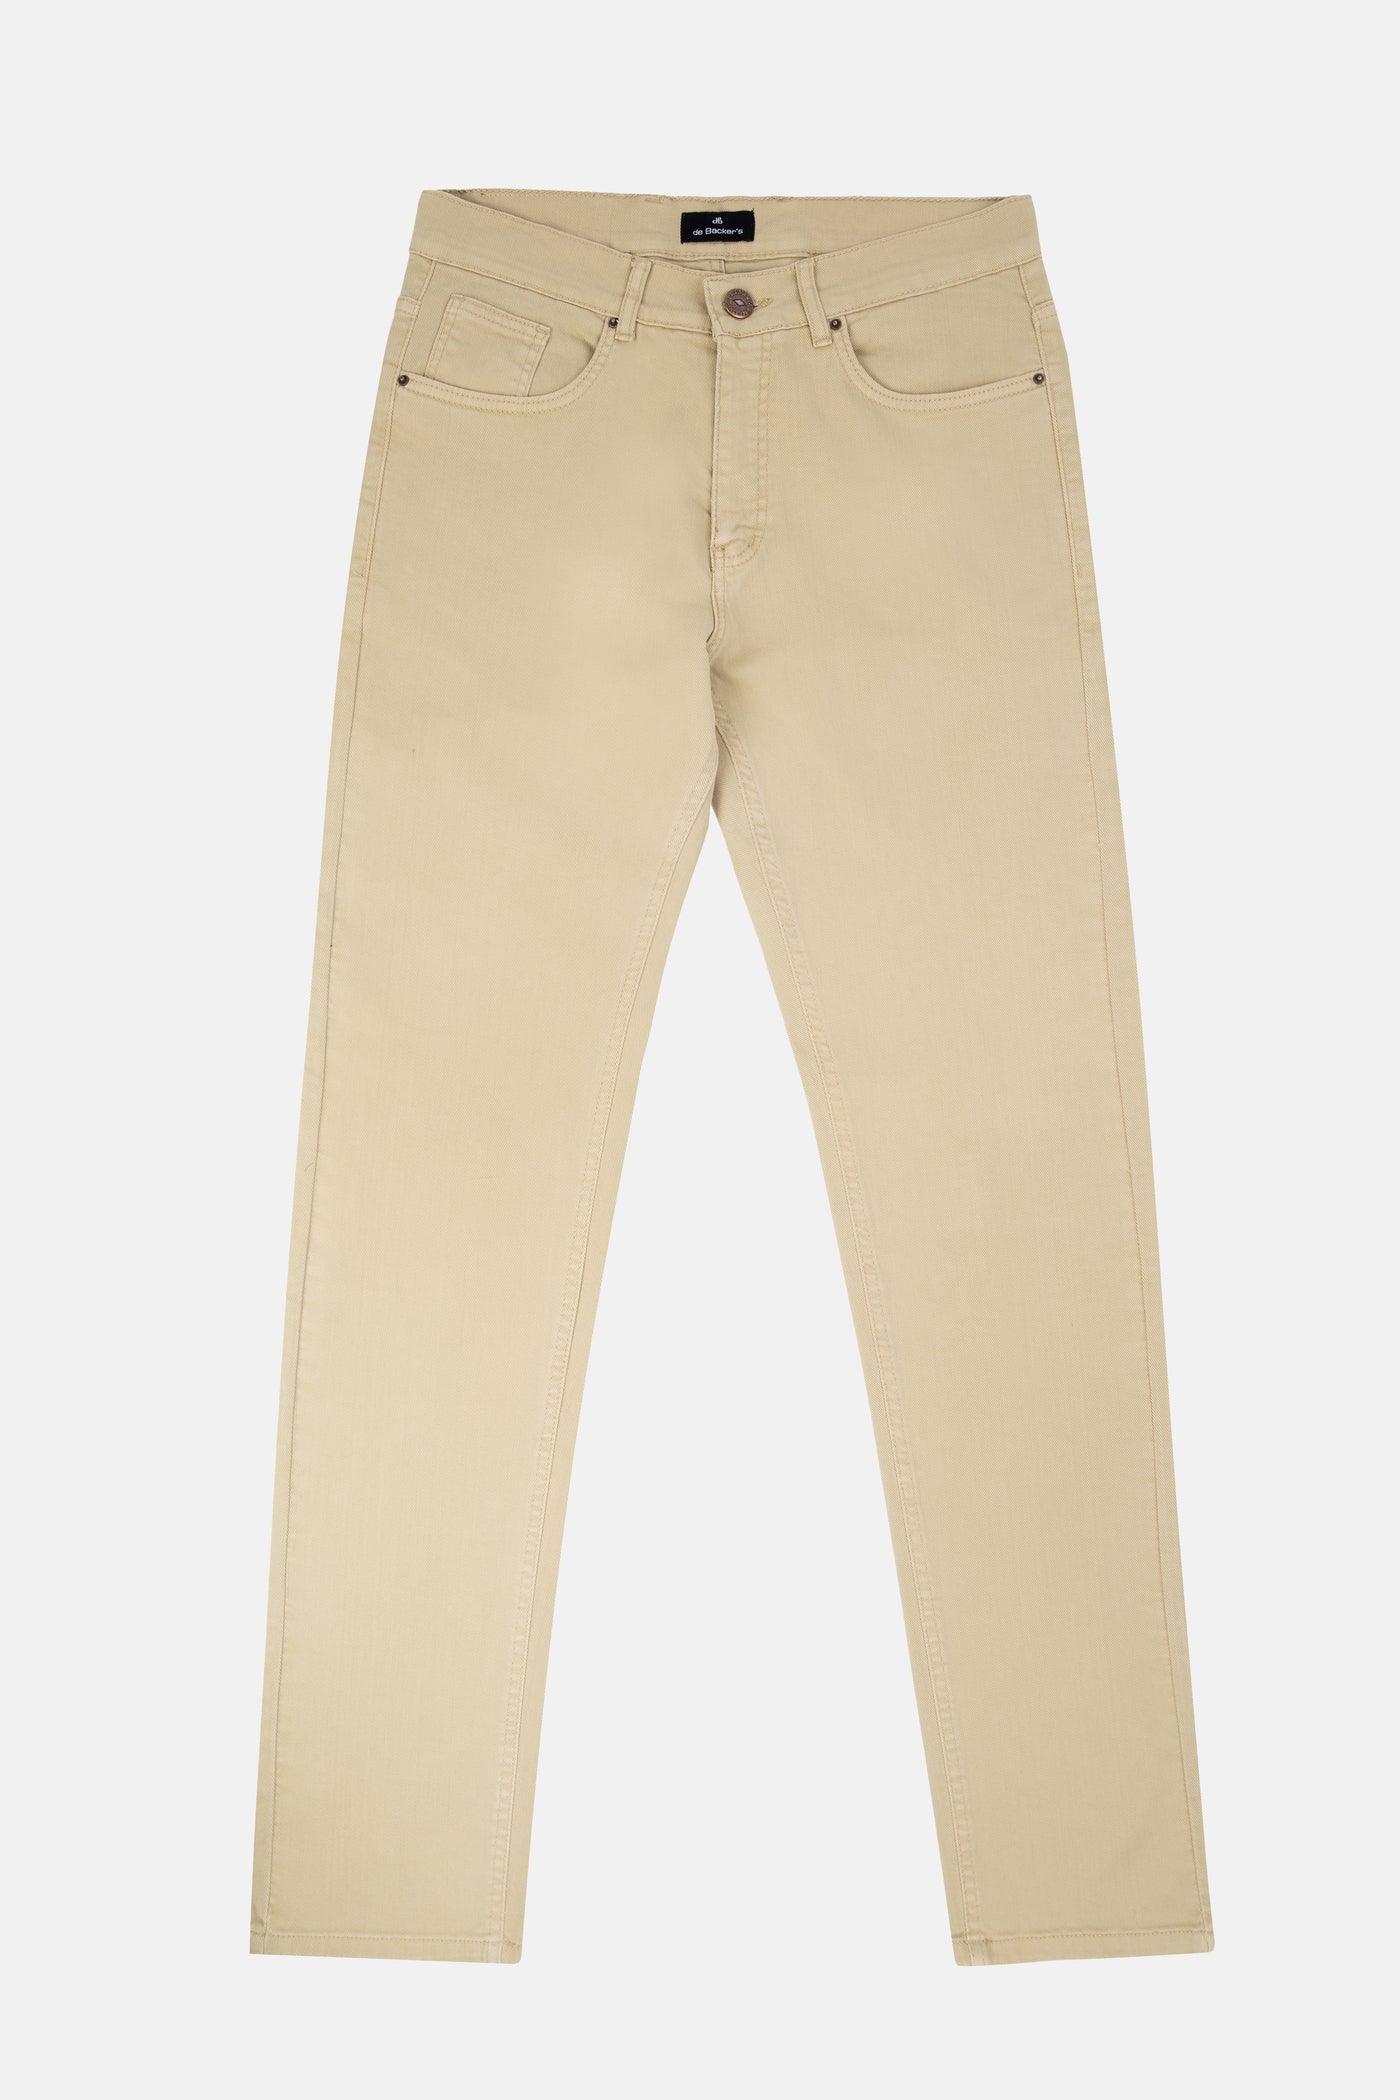 Dyed Dun Beige Jeans